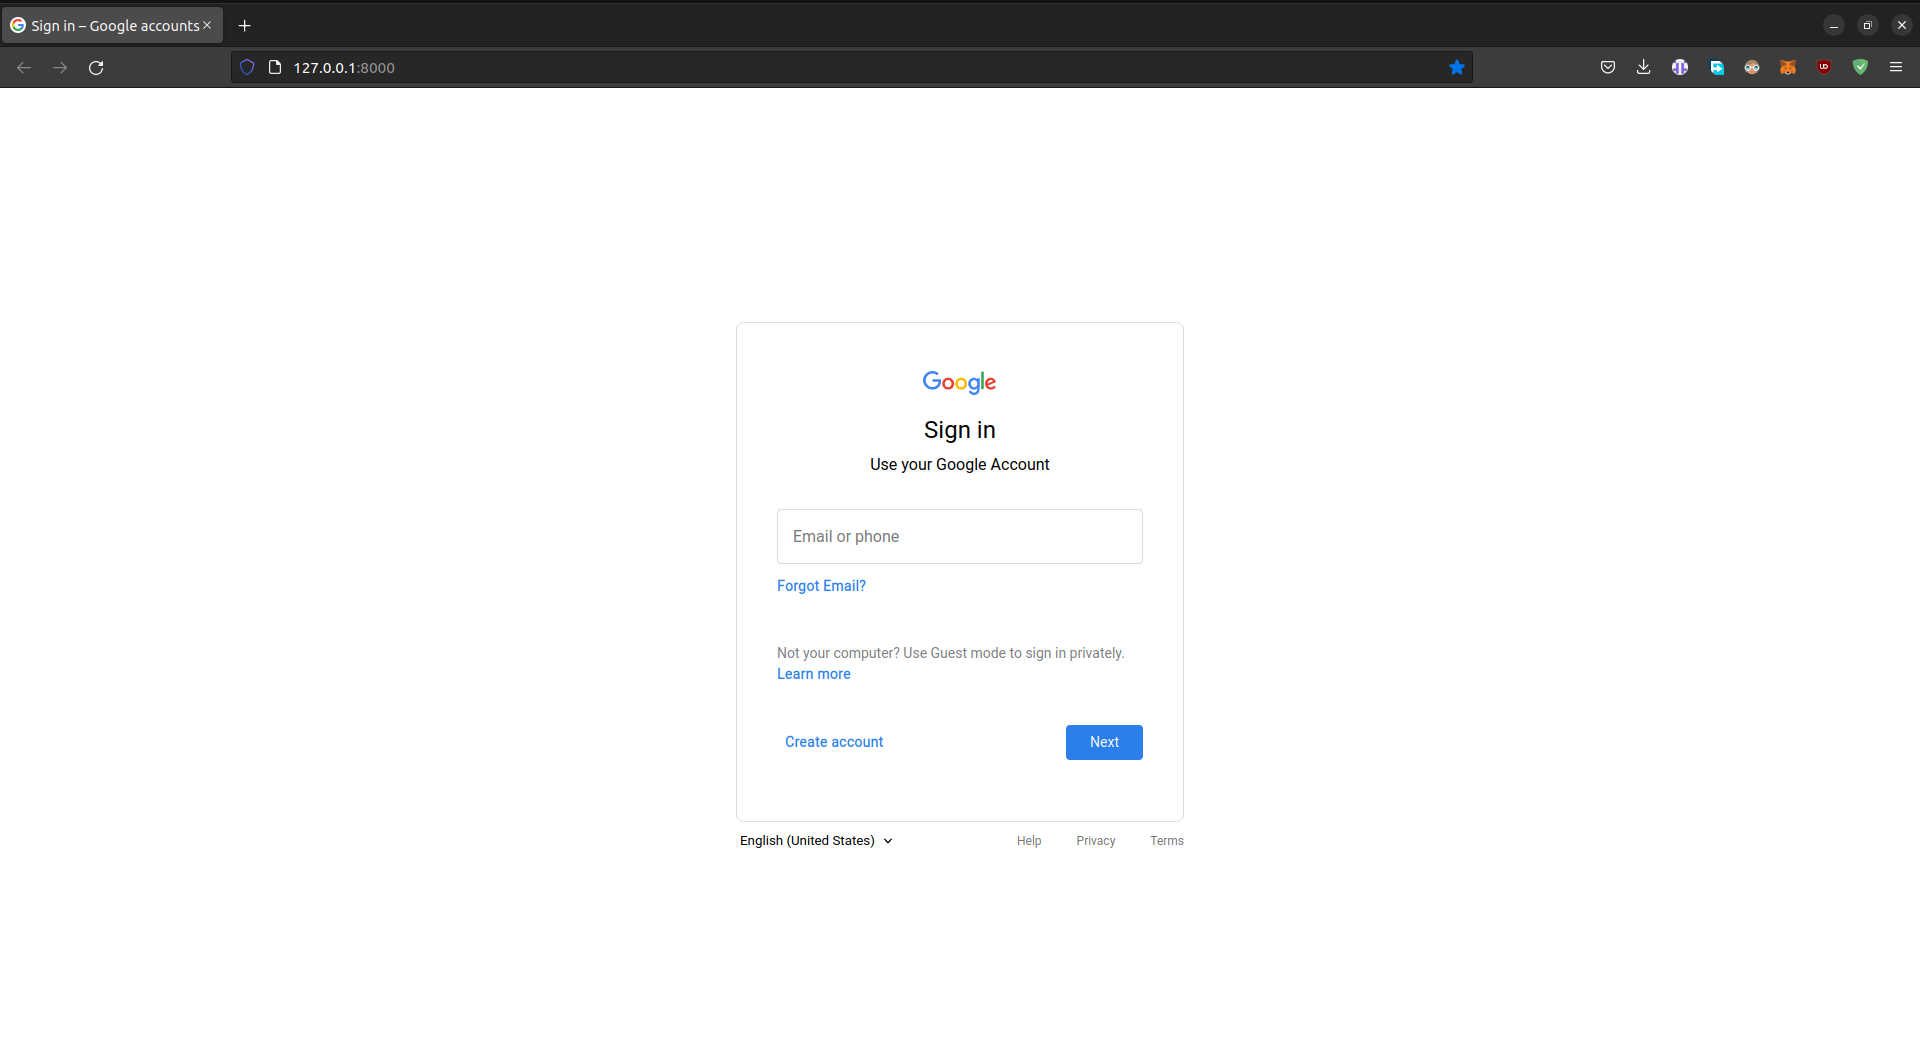 Google Login Page Phisher Home Page Image